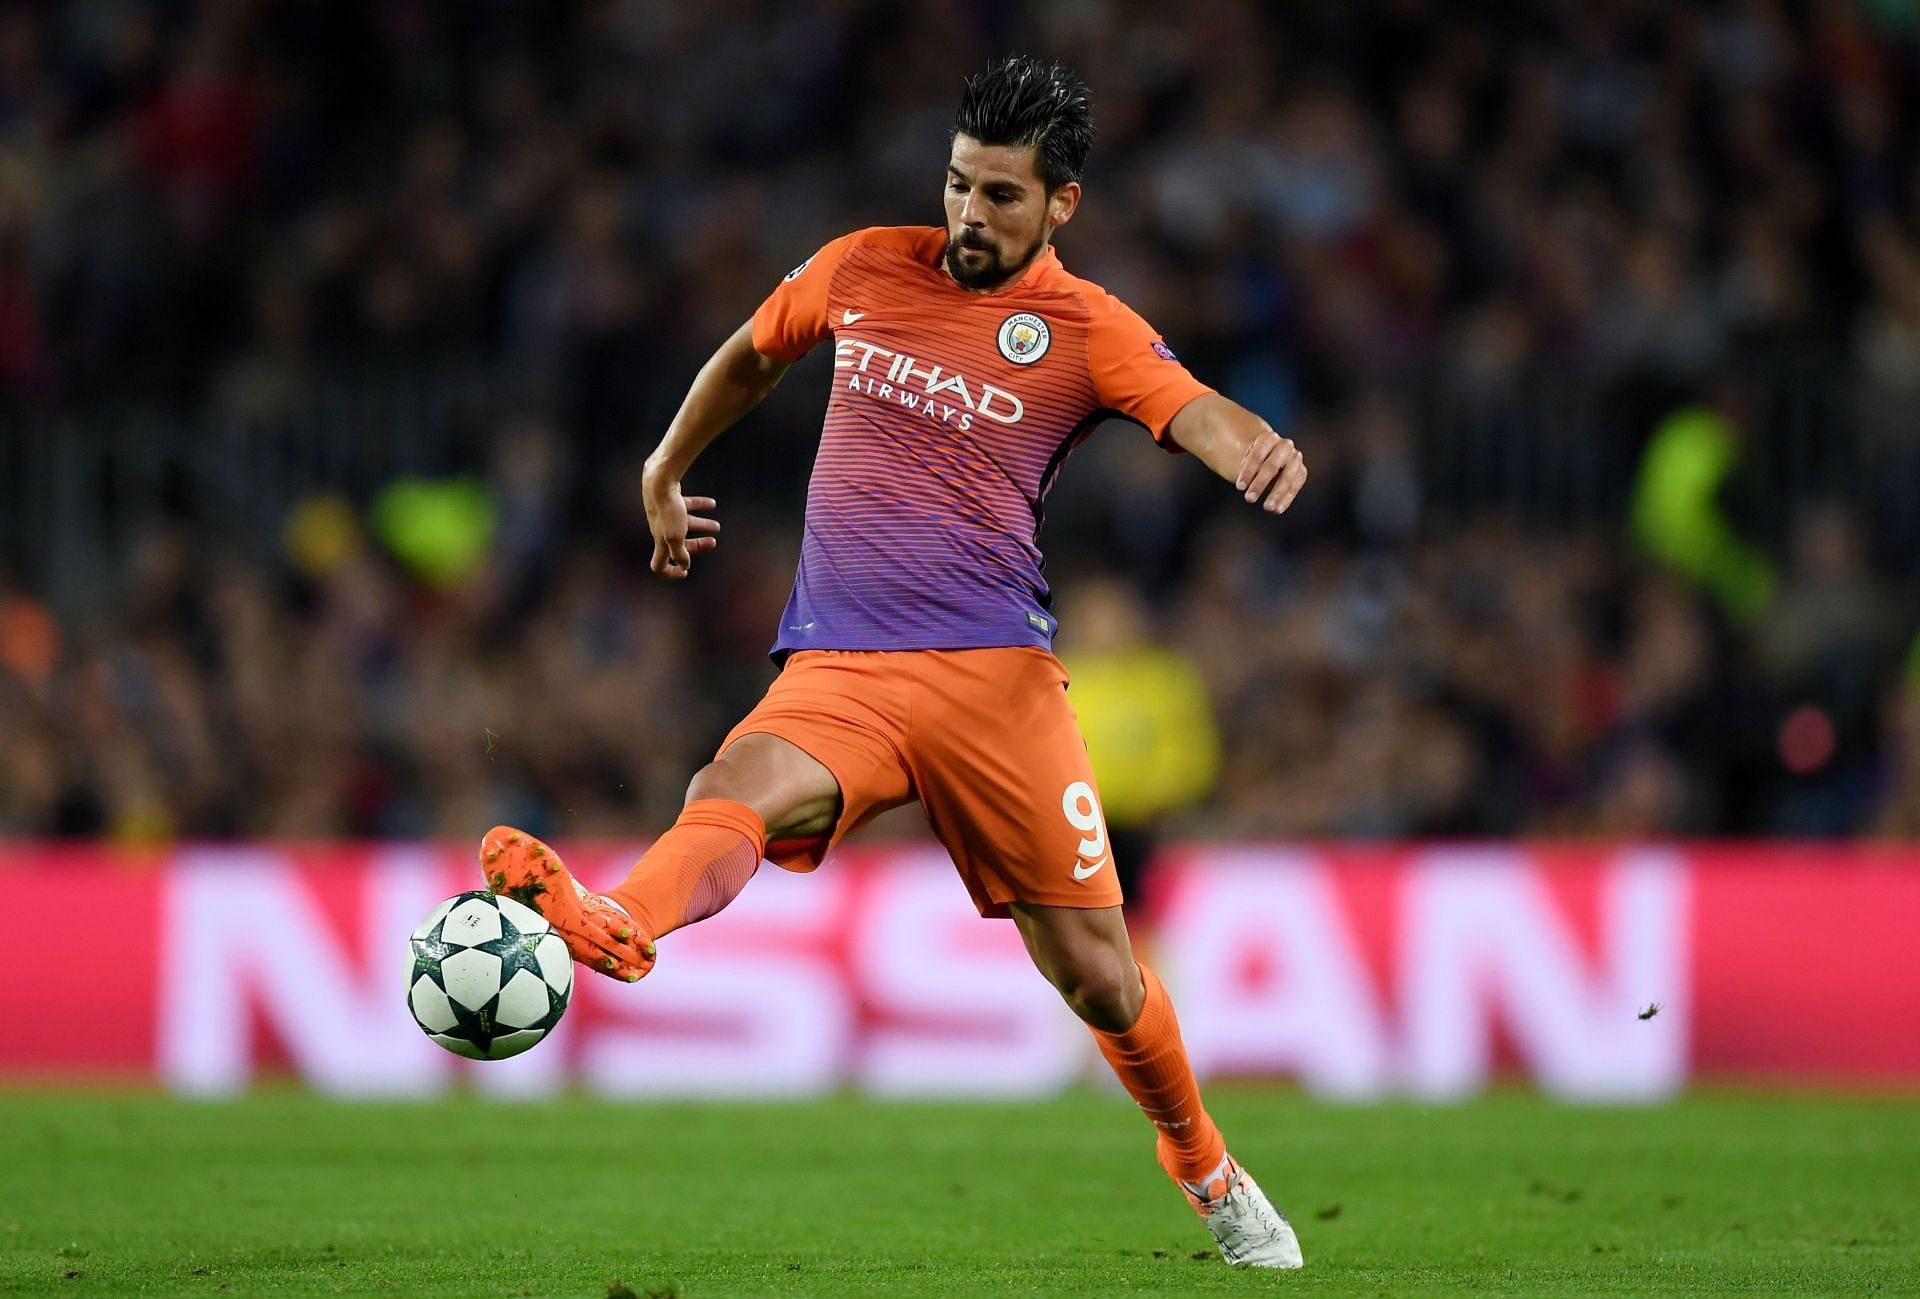 Nolito in action in a Champions League game against Barcelona.